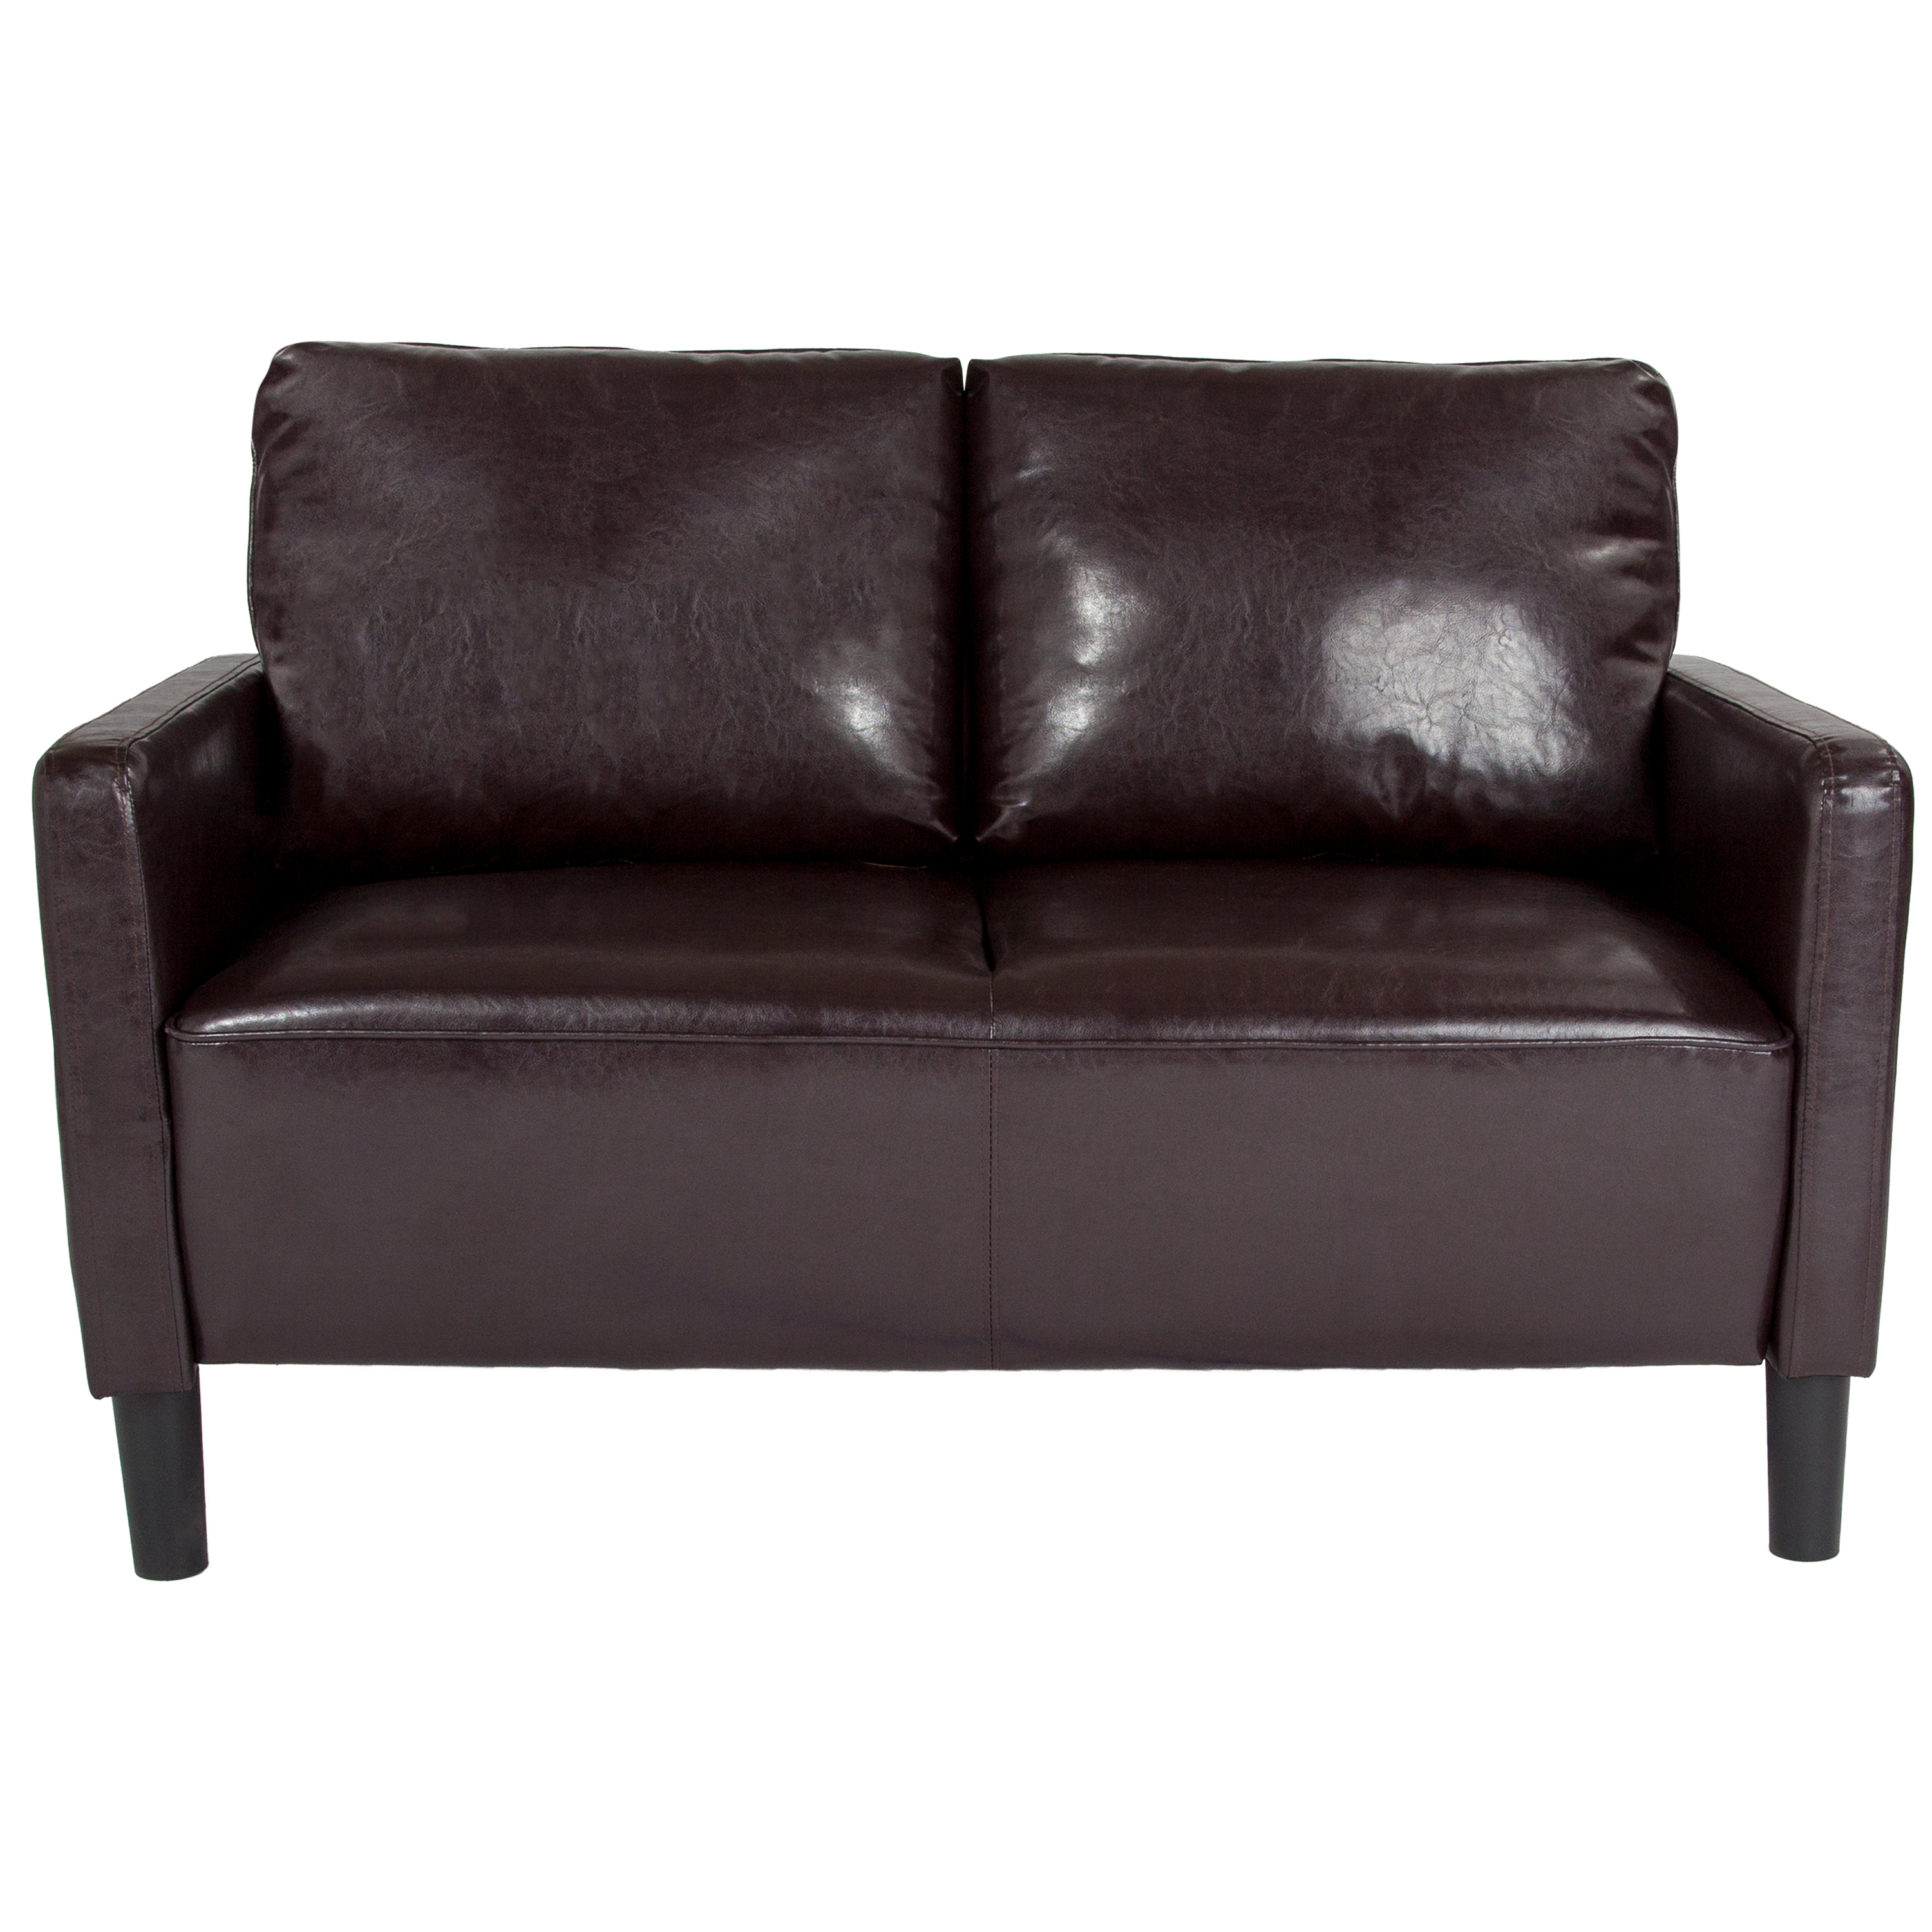 Flash Furniture Washington Park Upholstered Loveseat in Brown LeatherSoft - image 5 of 5